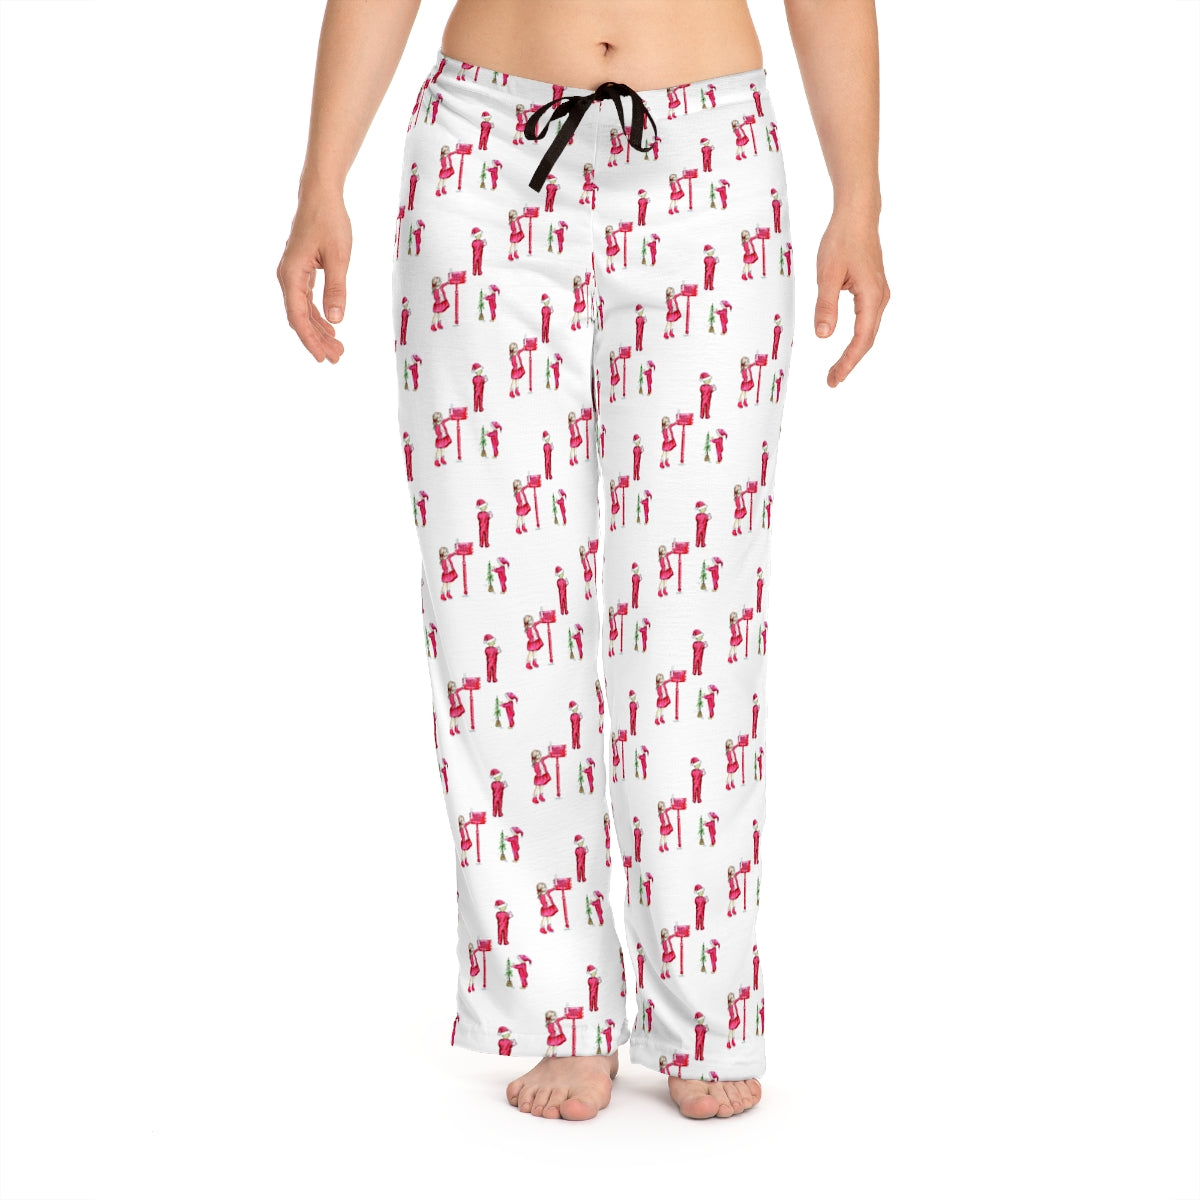 Candy Canes and Kids Women's Pajama Pants – Melsy's Illustrations